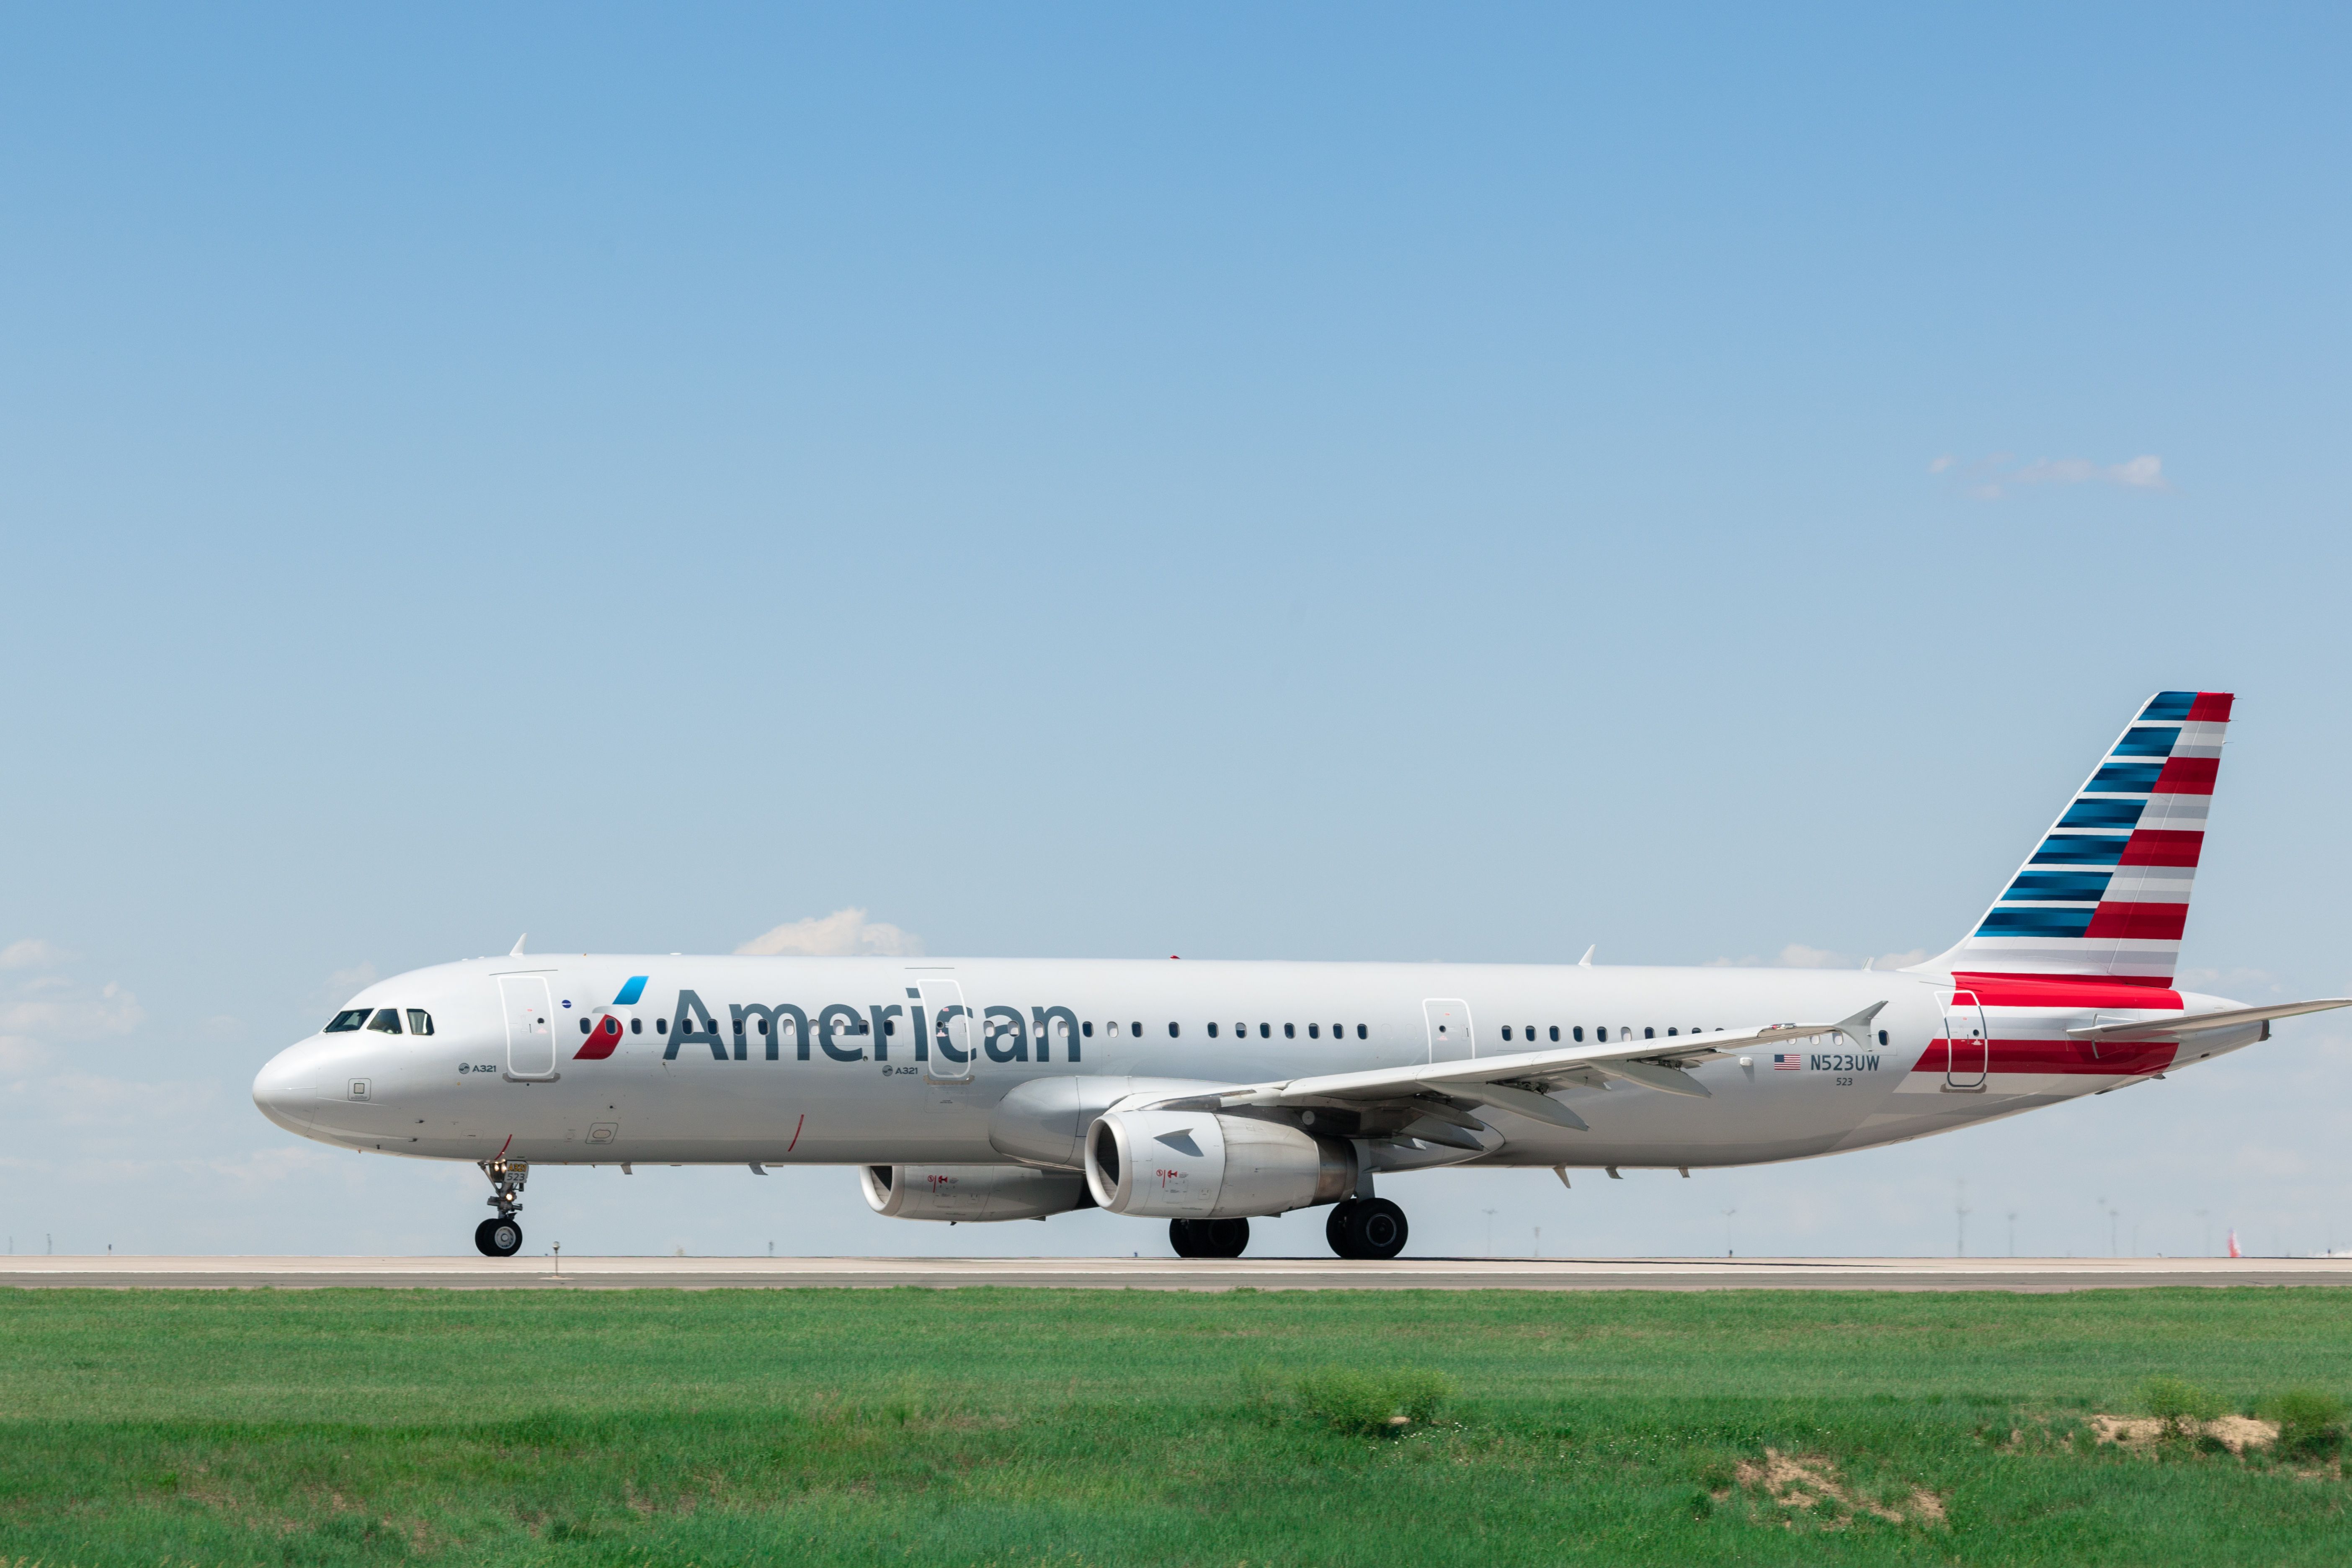 American Airlines Airbus A321 on taxiway